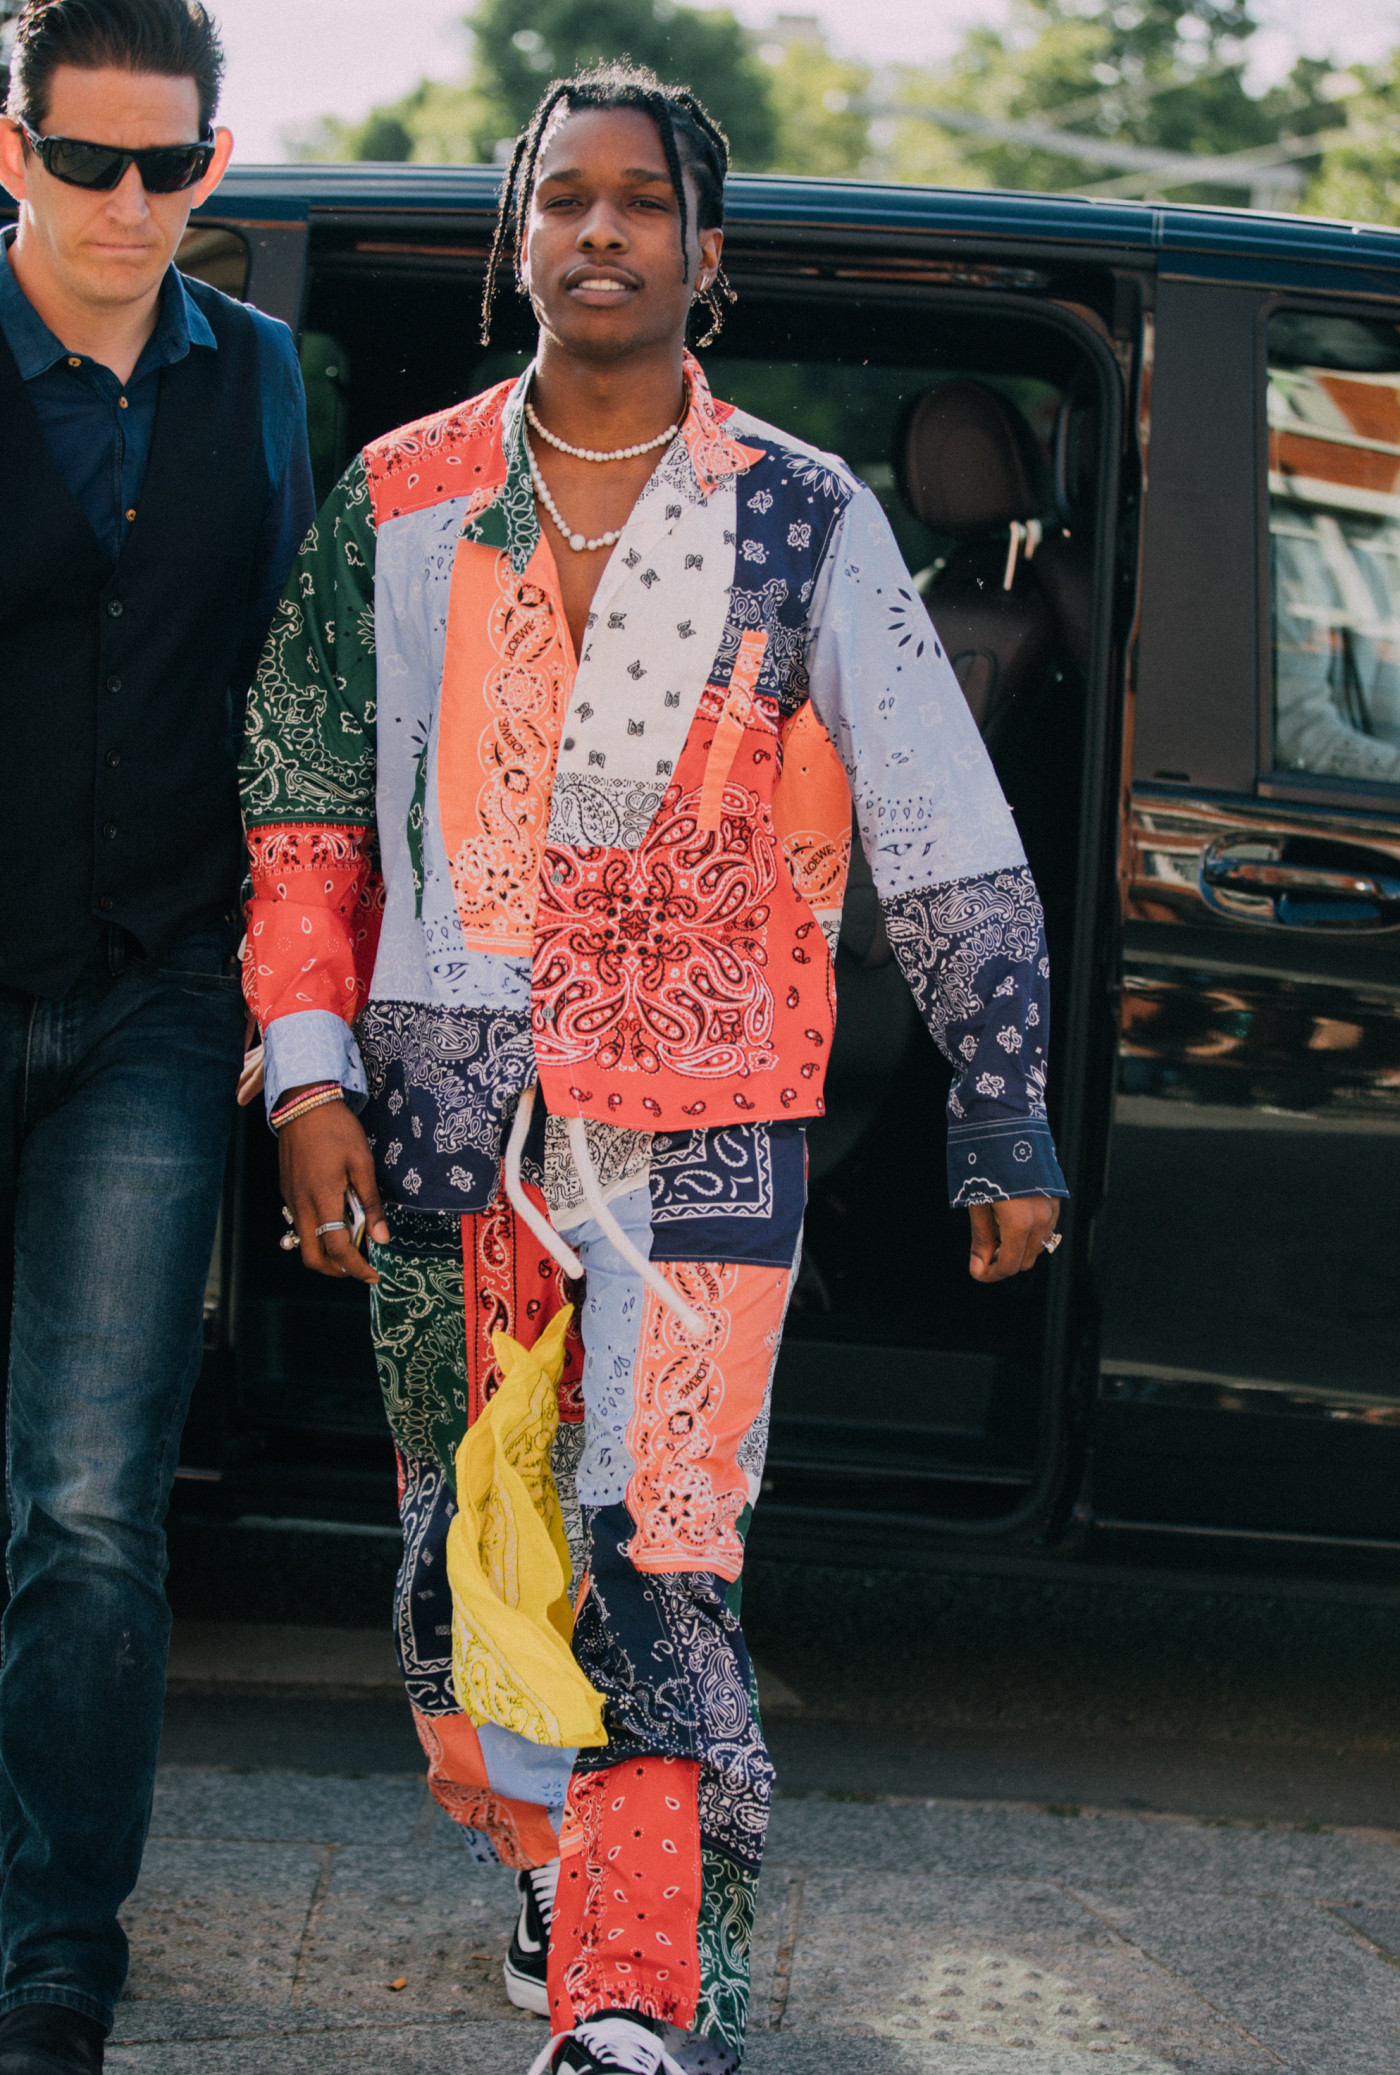 Asap Rocky Fashion The Best Outfits Of All Time Complex